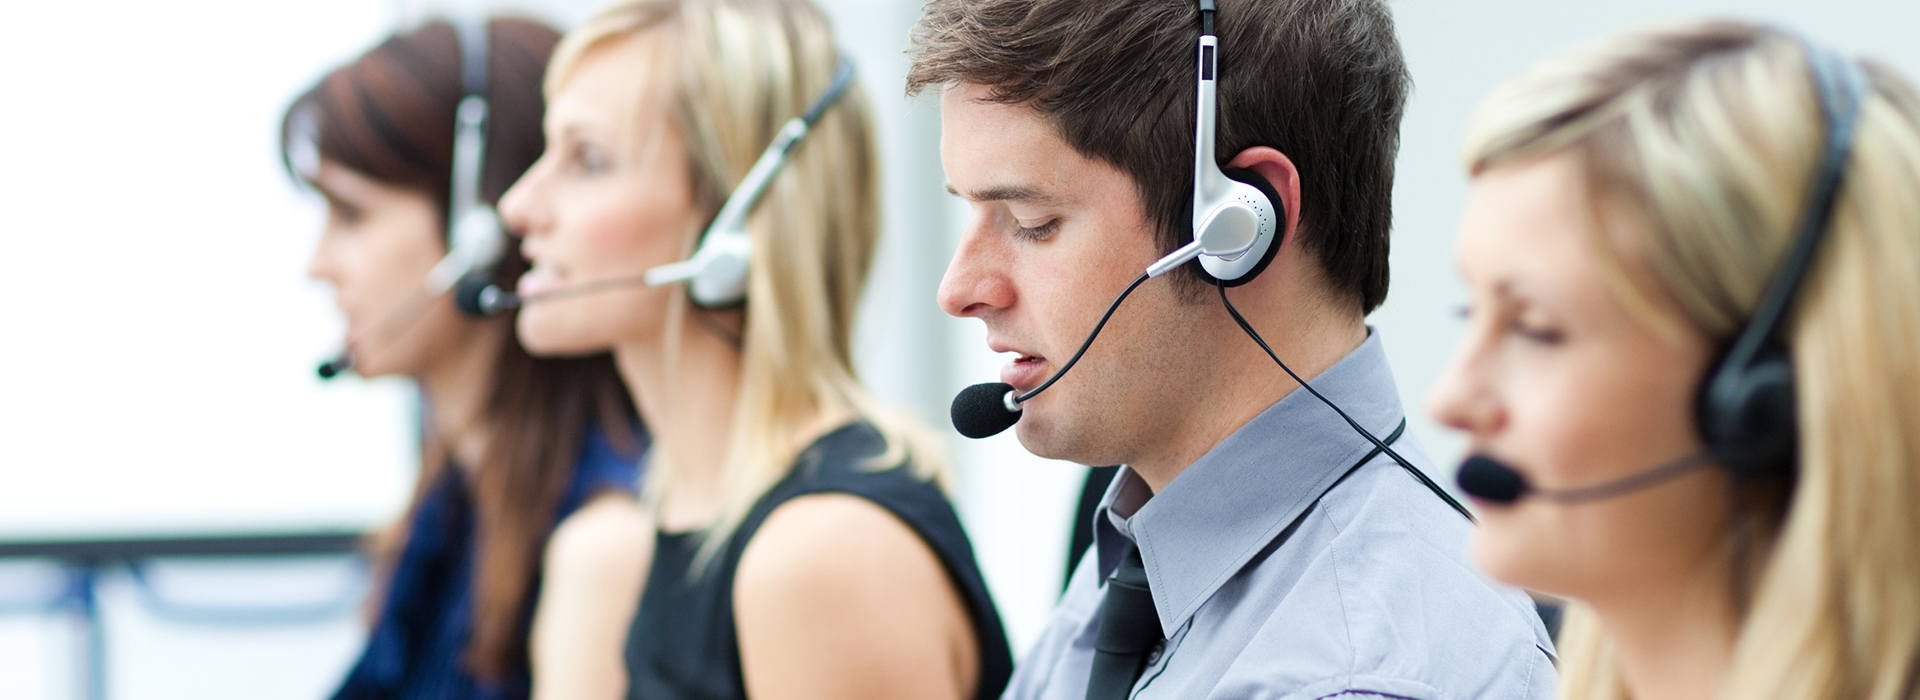 Attractive young man working in a call center with his colleagues